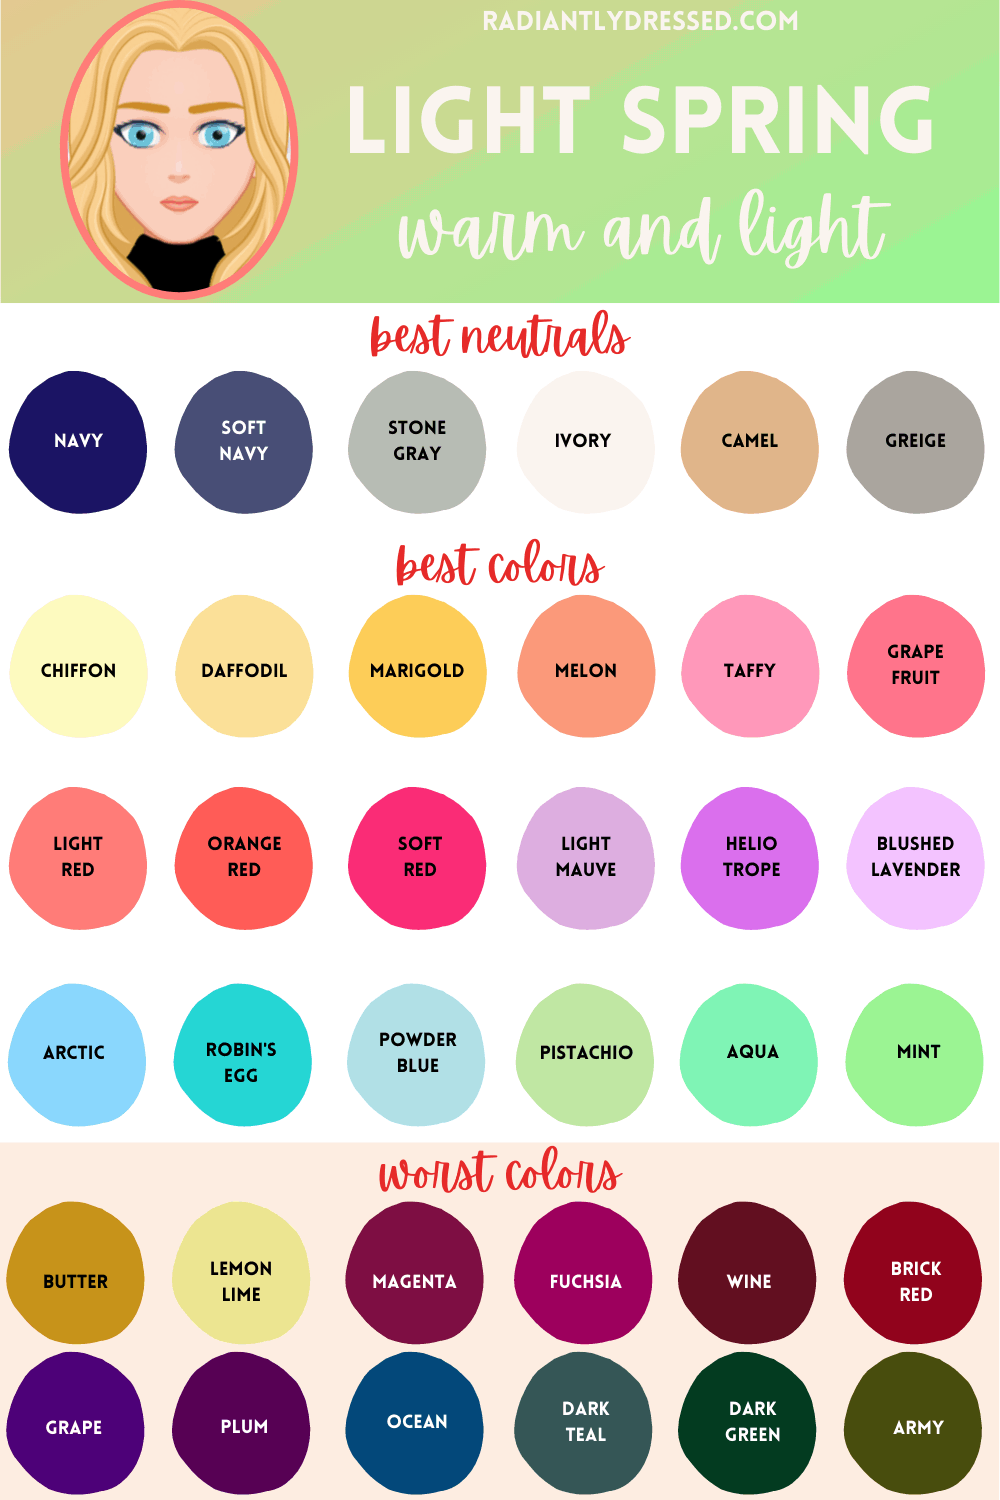 light spring colors to avoid